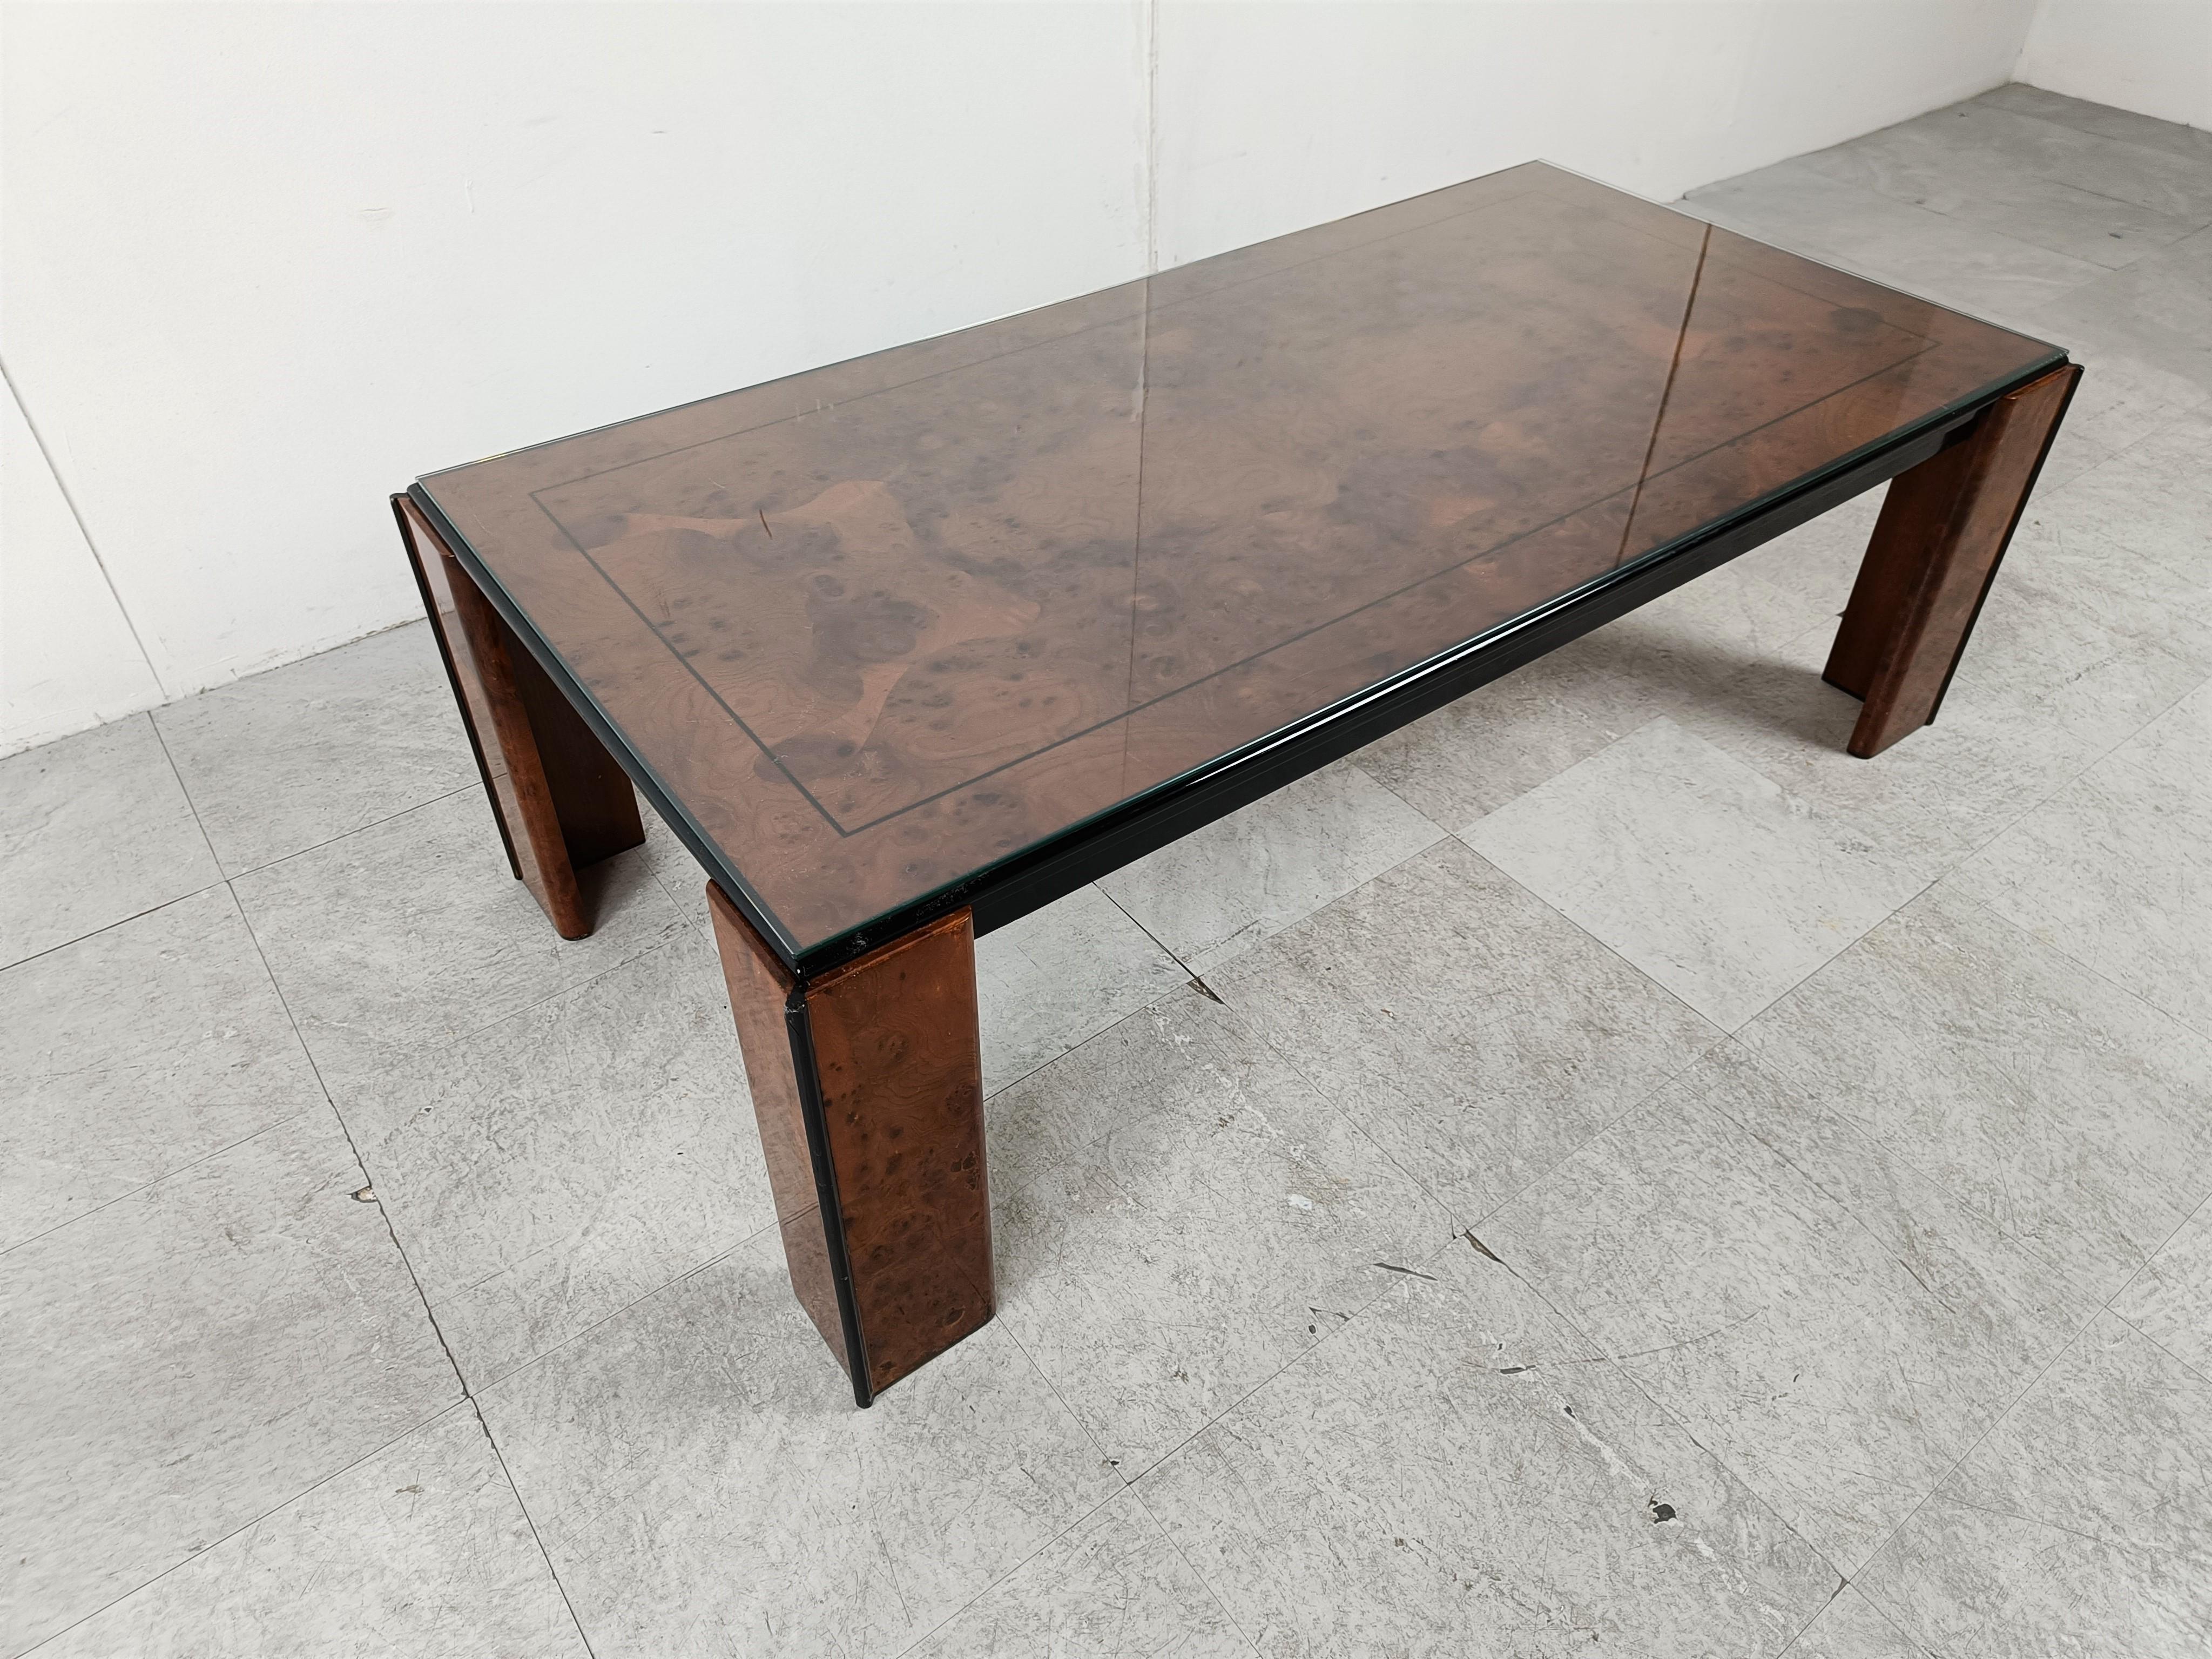 Vintage Burl Wood and Lacquer Coffee Table, 1970s For Sale 2